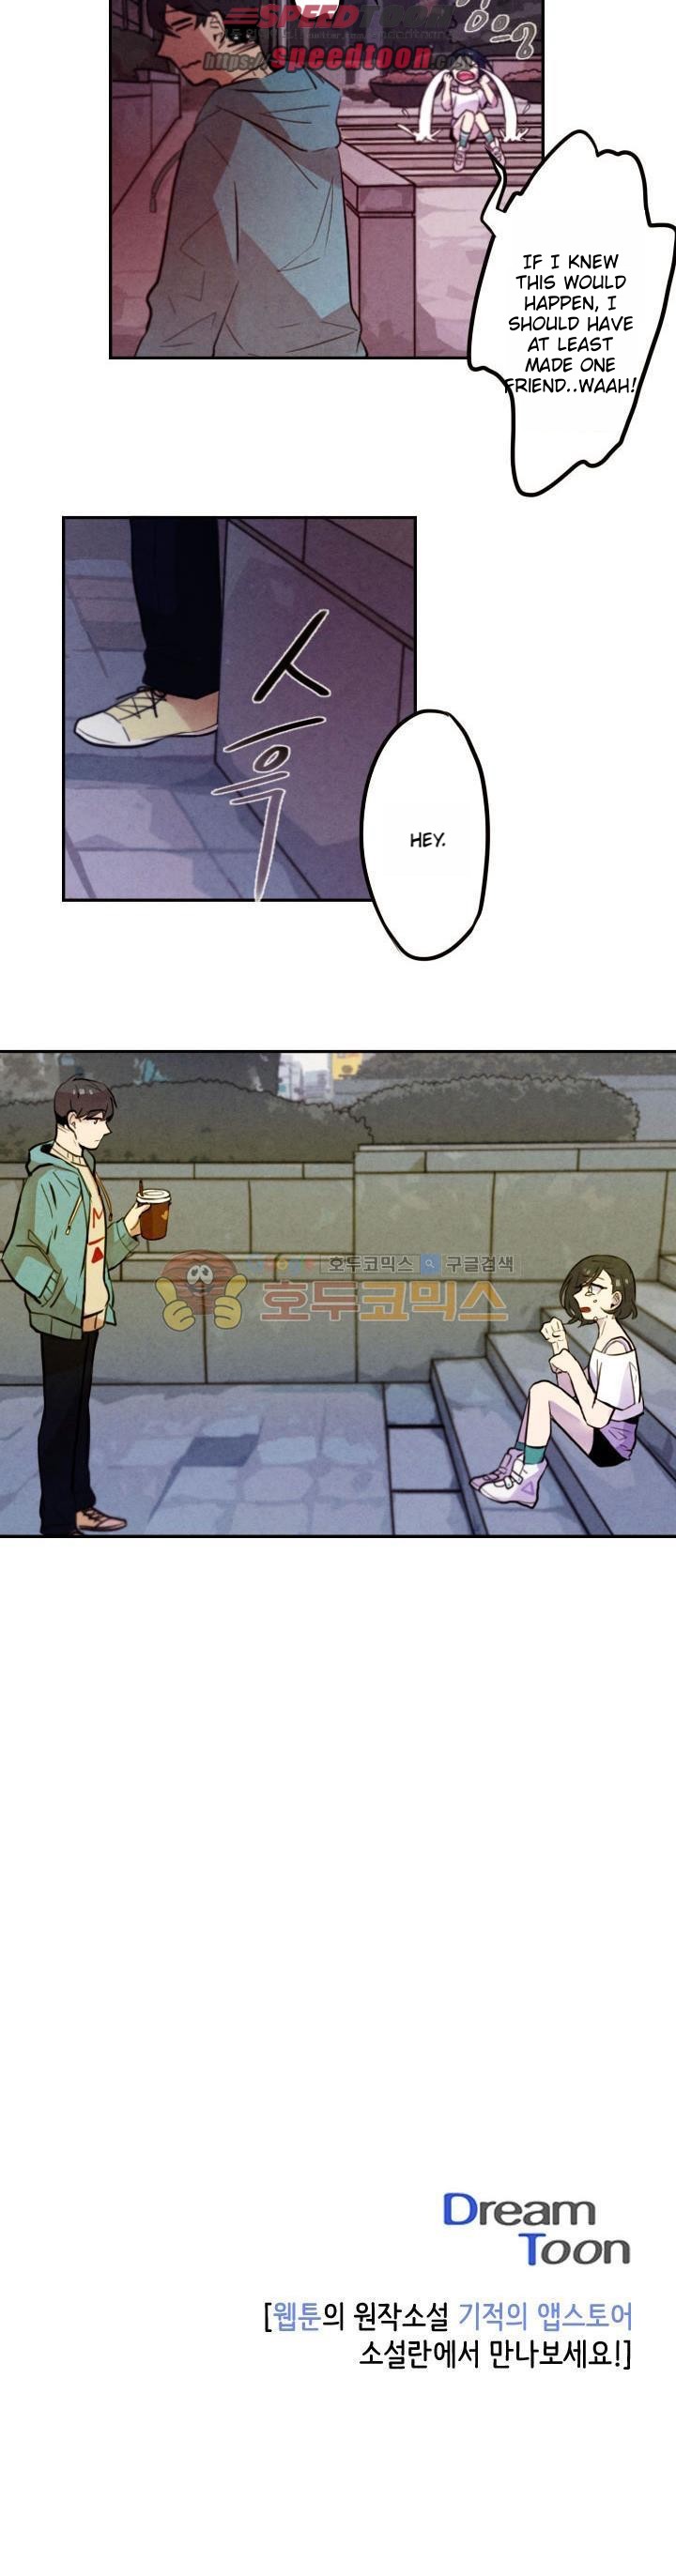 Miracle App Store Ch. 15